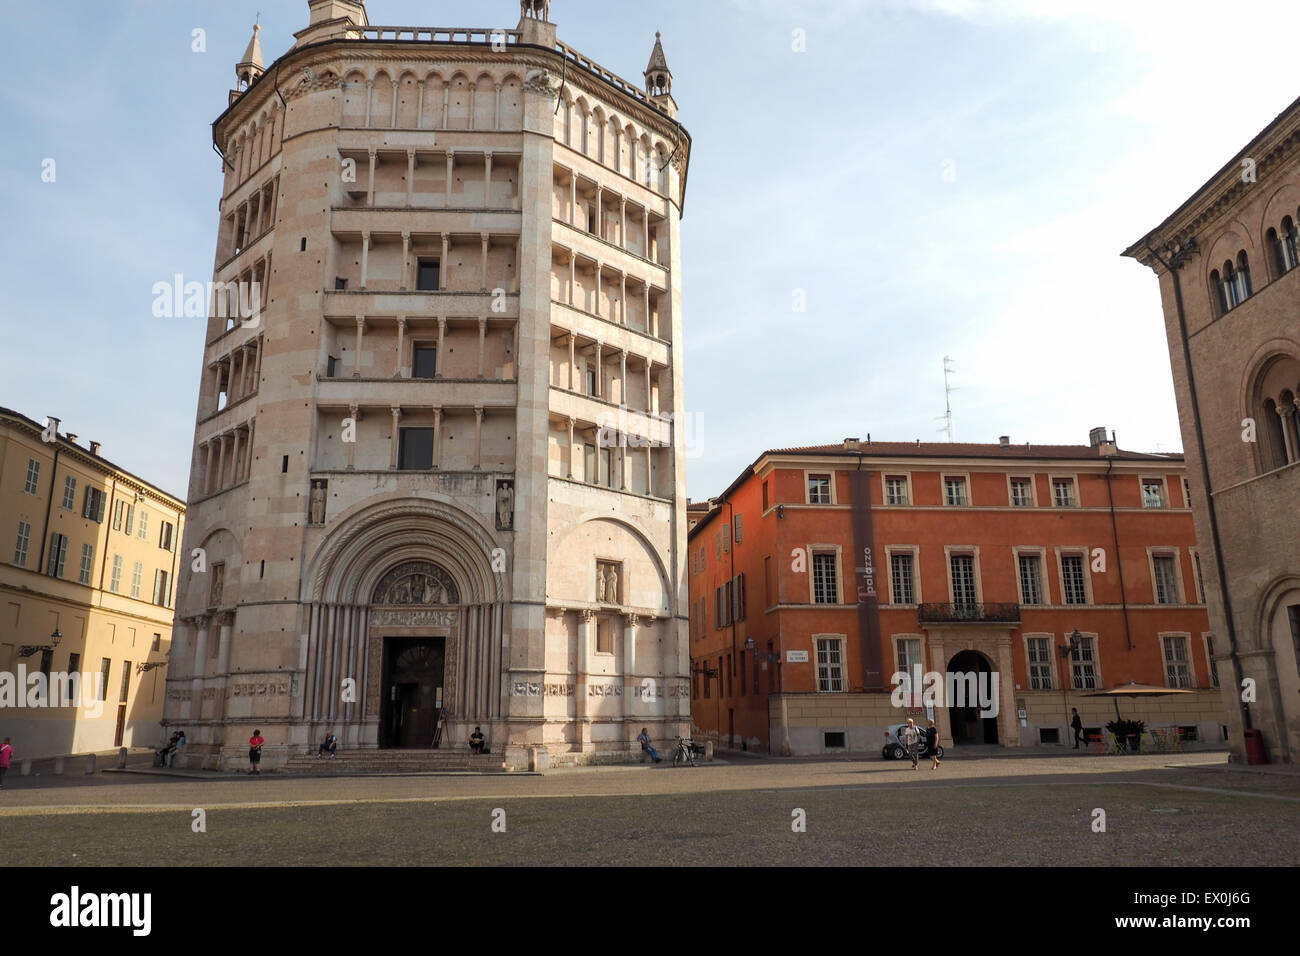 The Baptistery of Parma Cathedral, Stock Photo